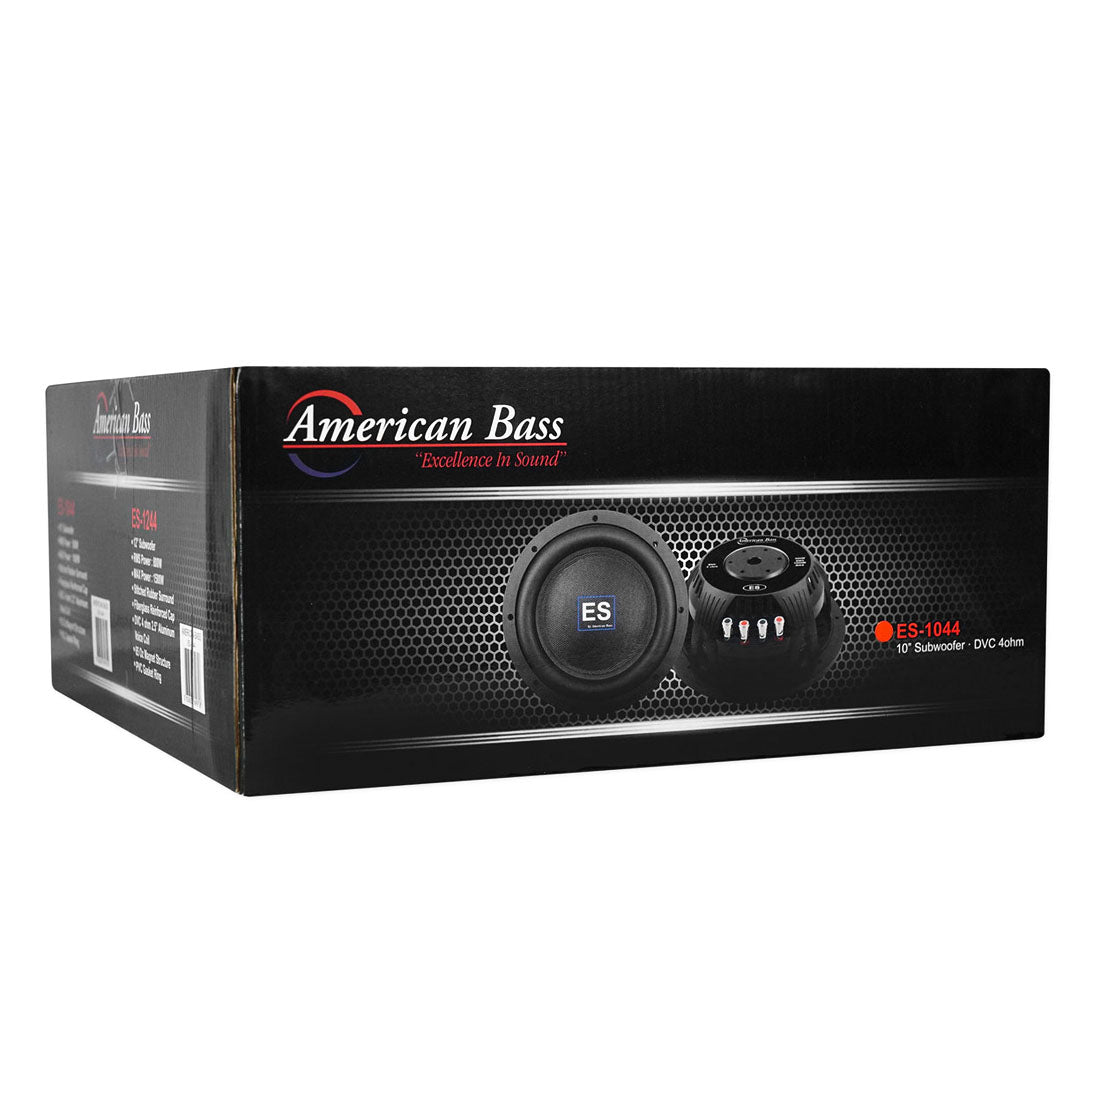 American Bass ES1044 1000 W Max 10" Dual 4-Ohm DVC Stereo Car Audio Subwoofer